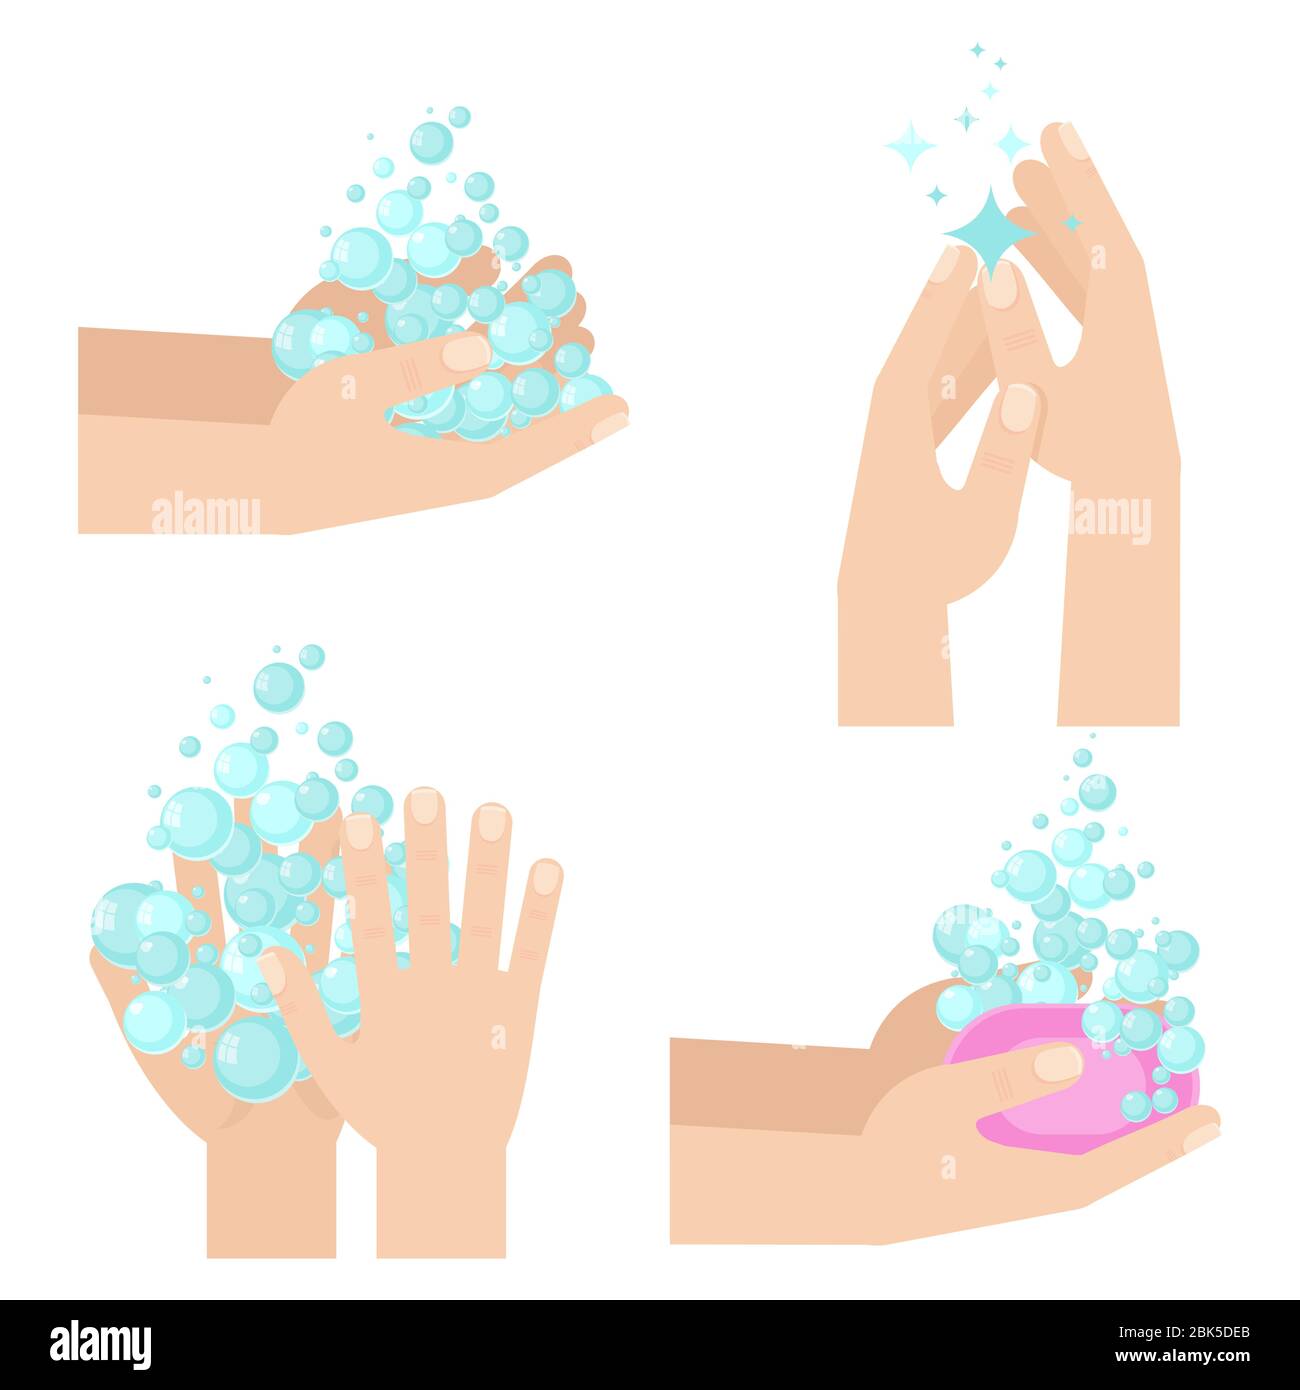 Hand hygiene. Hand washing with soap suds. Stock Vector